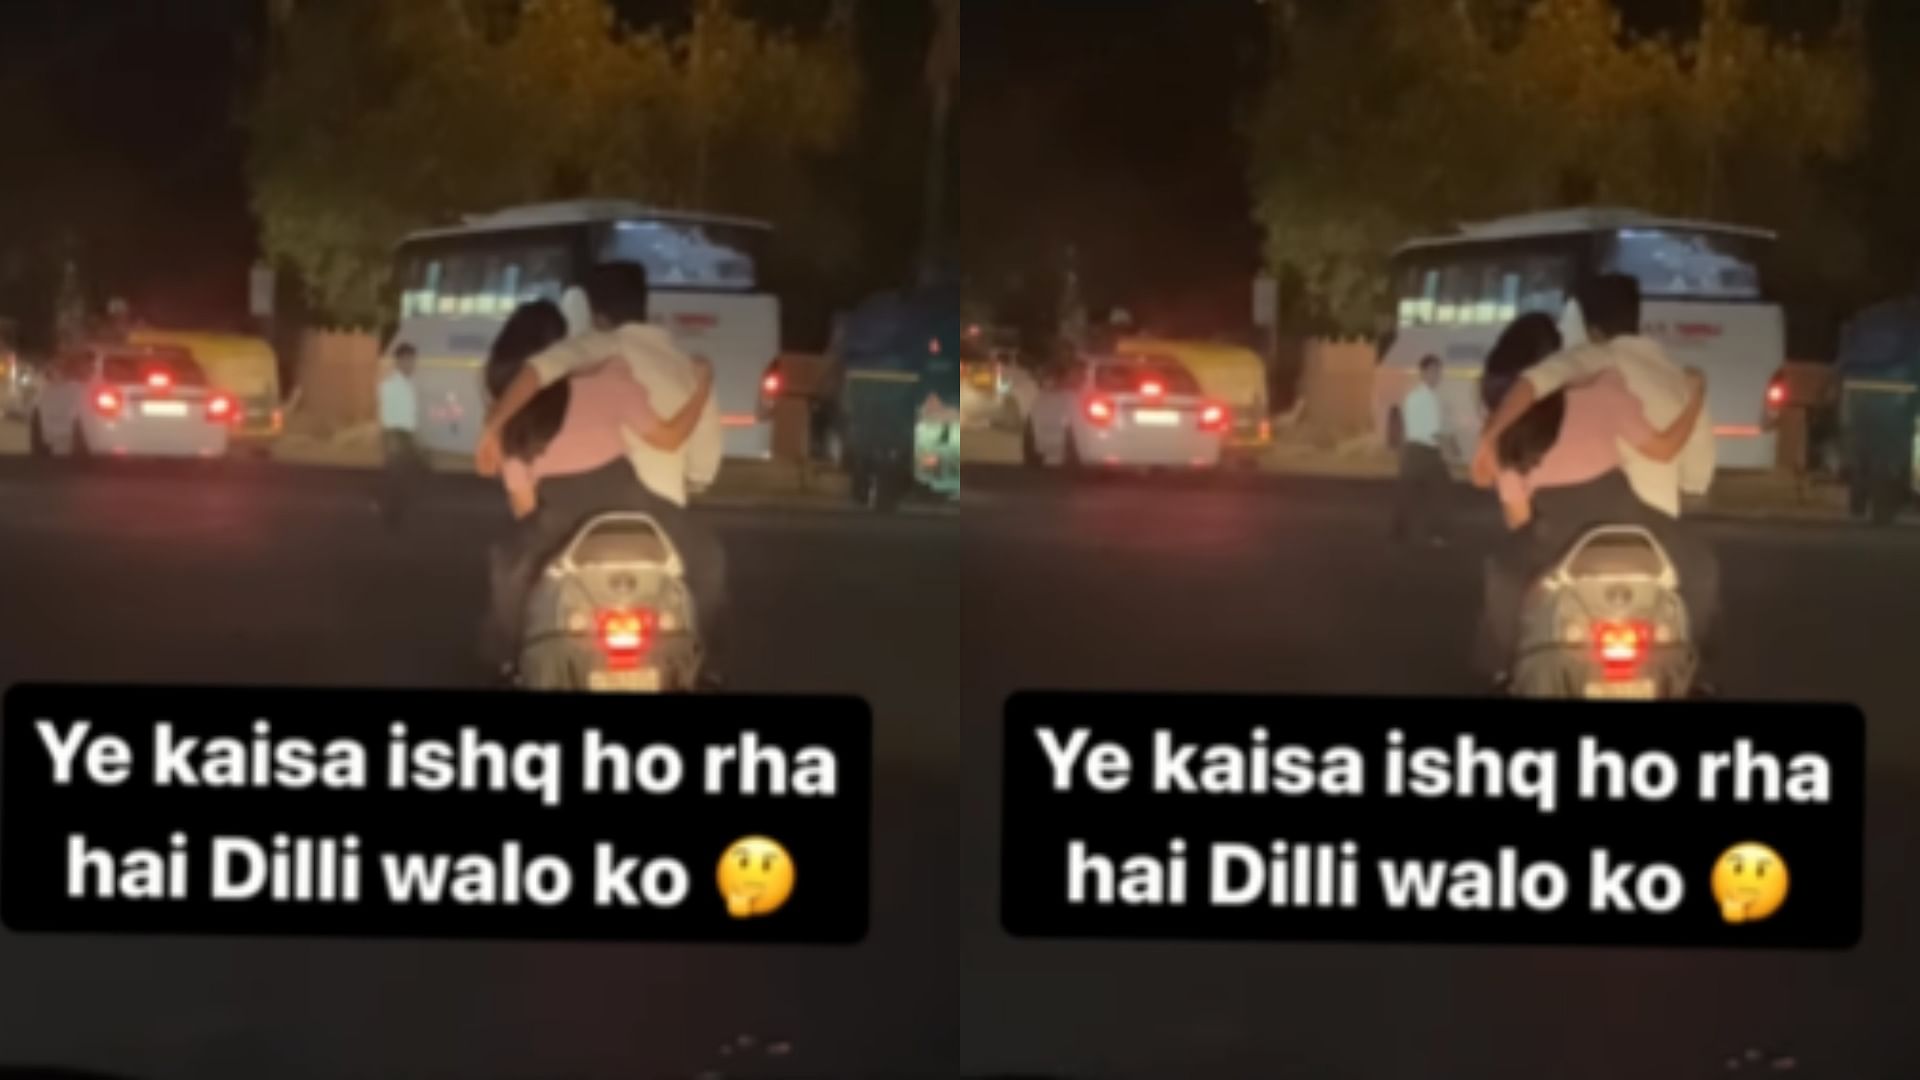 Couple romance on scooty video went viral on social media